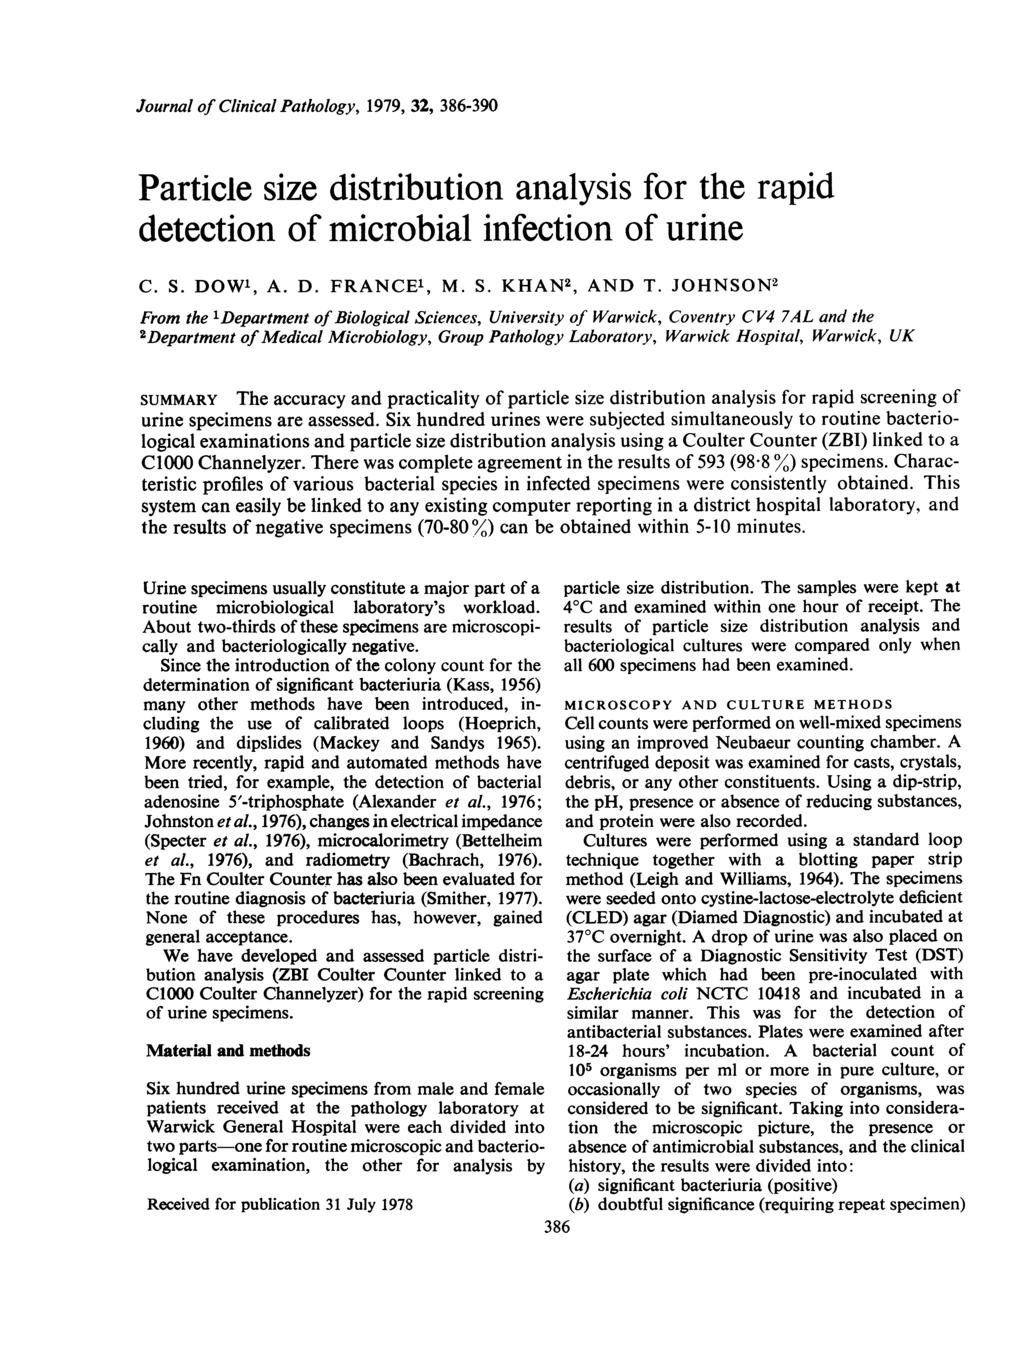 Journal of Clinical Pathology, 1979, 32, 386-390 Particle size distribution analysis for the rapid detection of microbial infection of urine C. S. DOW1, A. D. FRANCE', M. S. KHAN2, AND T.